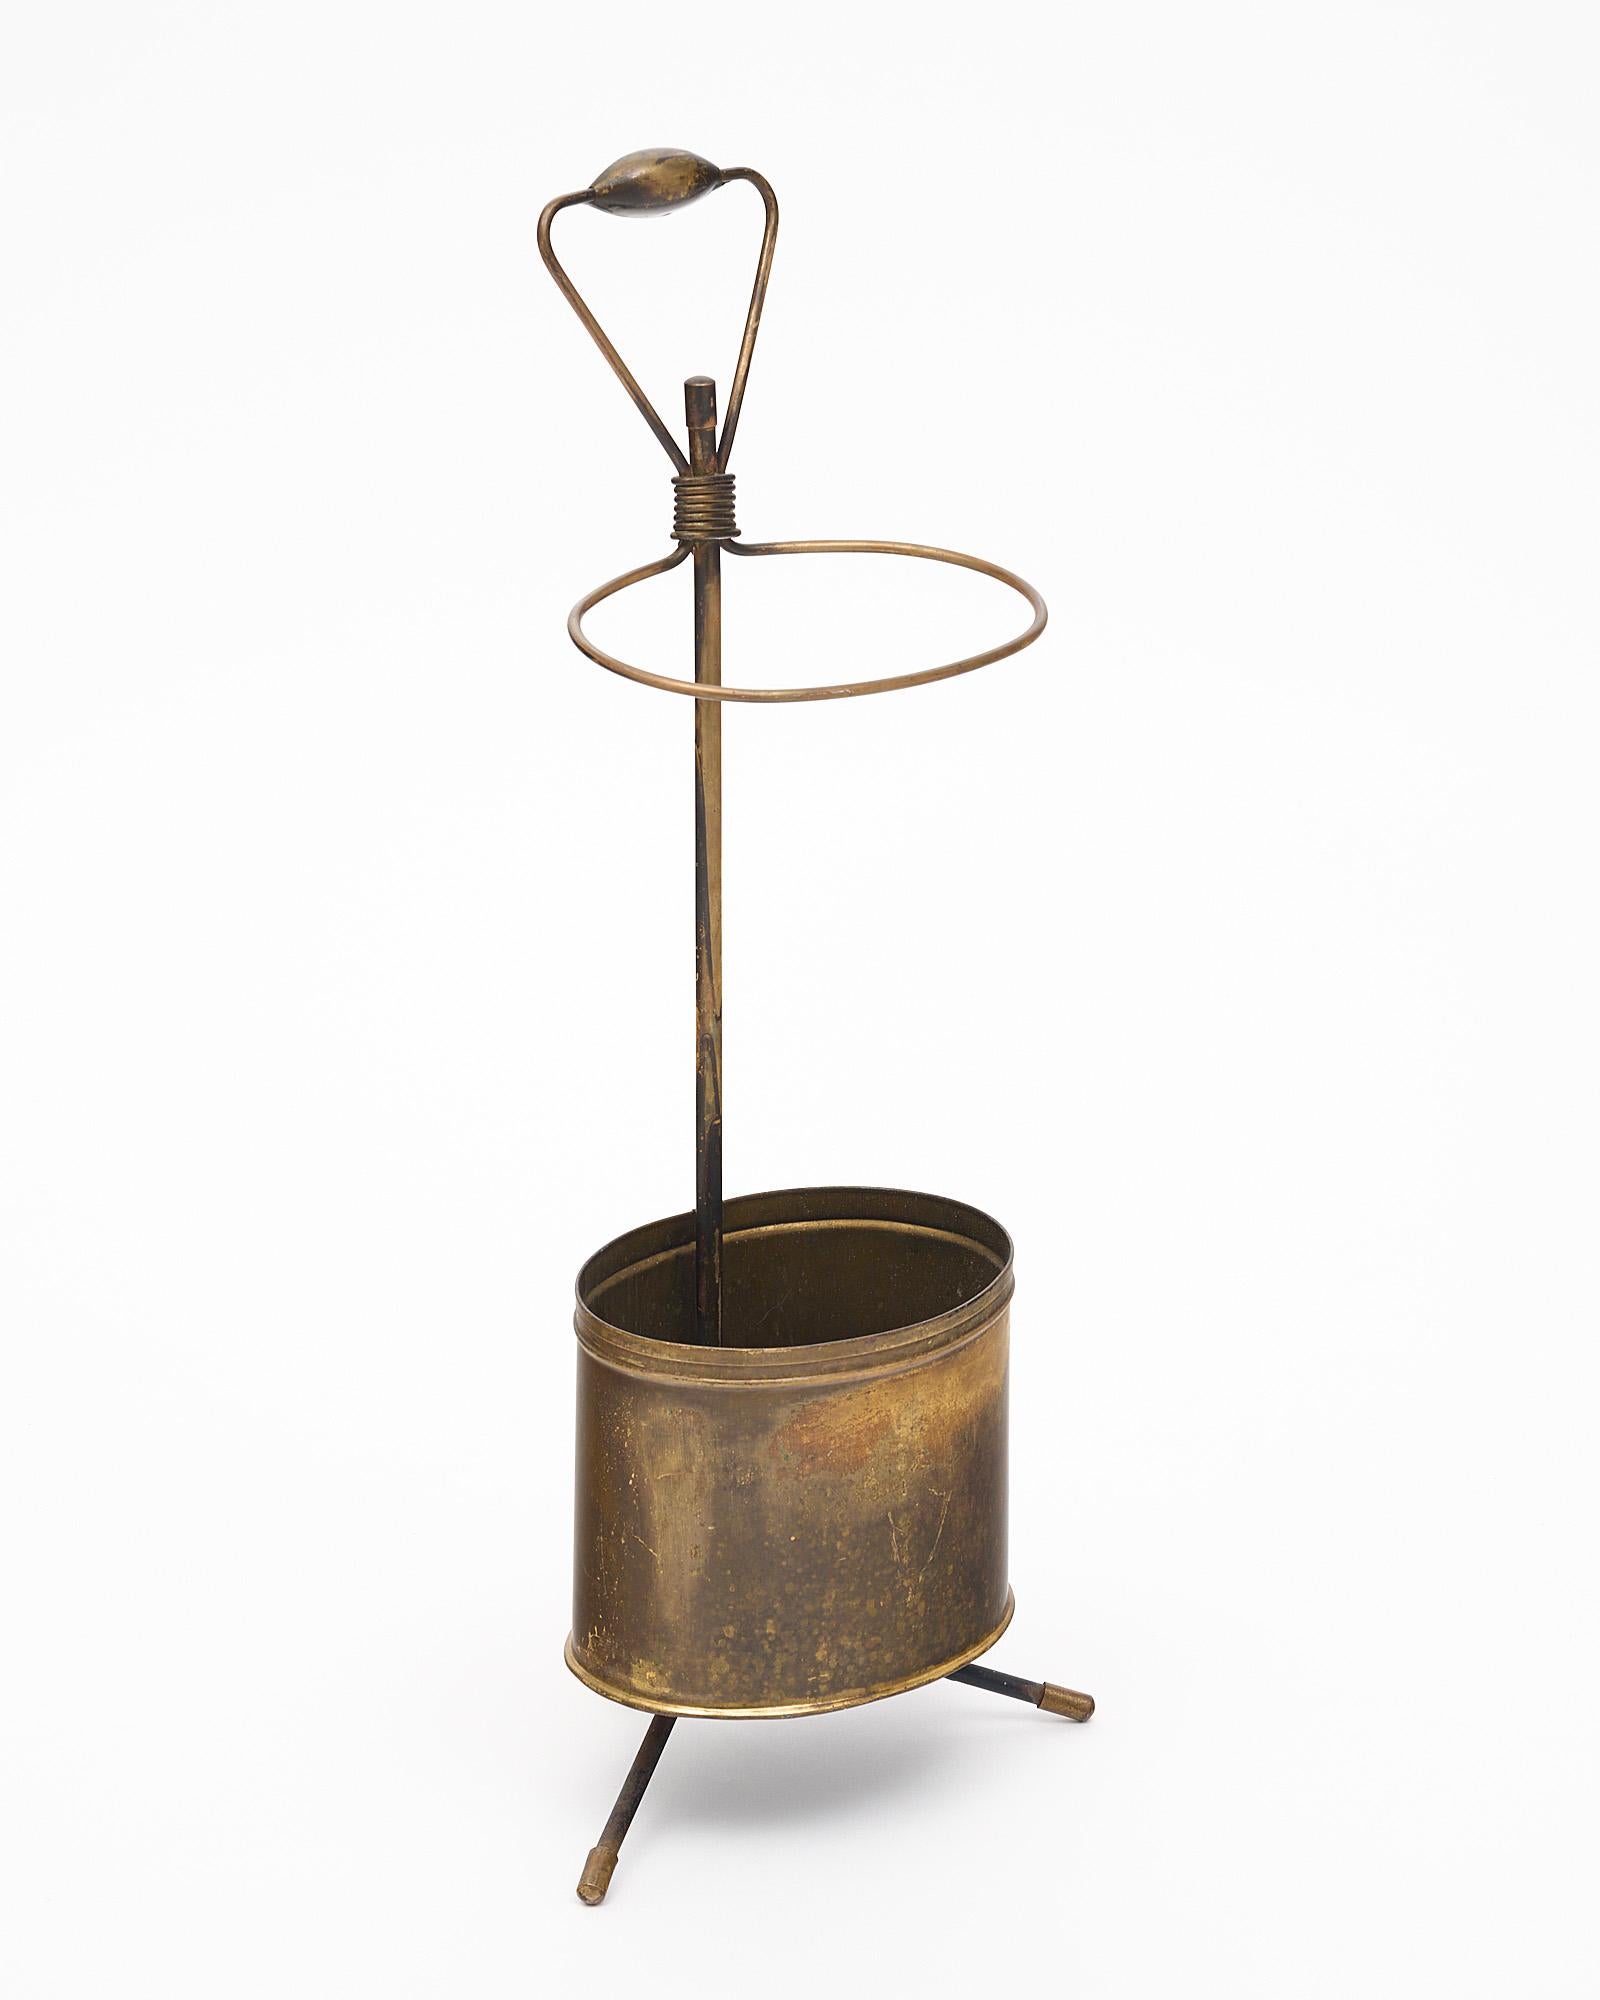 Umbrella stand made of brass from France in the manner of Jacques Adnet. This piece sits on a tripod base and has a functional holder at the base. There is a handle and a top holder.